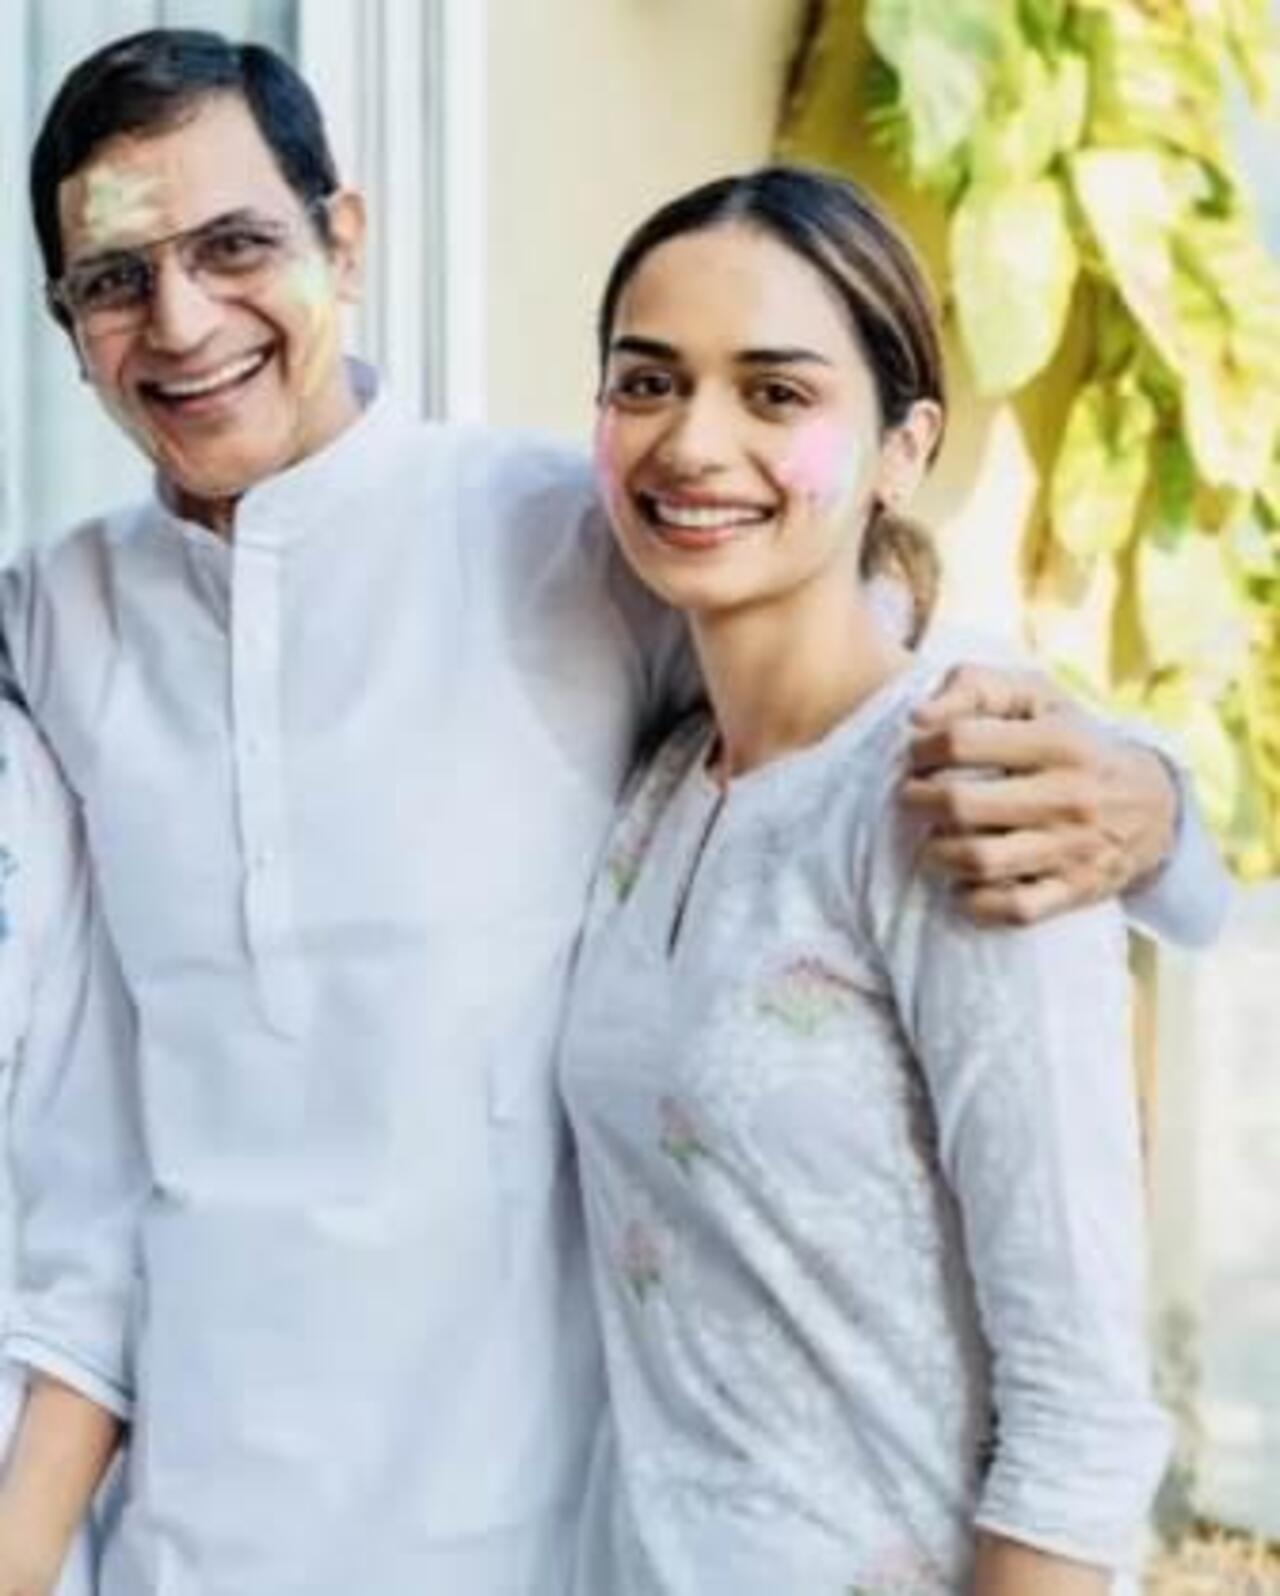 Following her father's footsteps, Manushi Chhillar was also studying medicine in Sonipat before winning the Miss World Pageant 